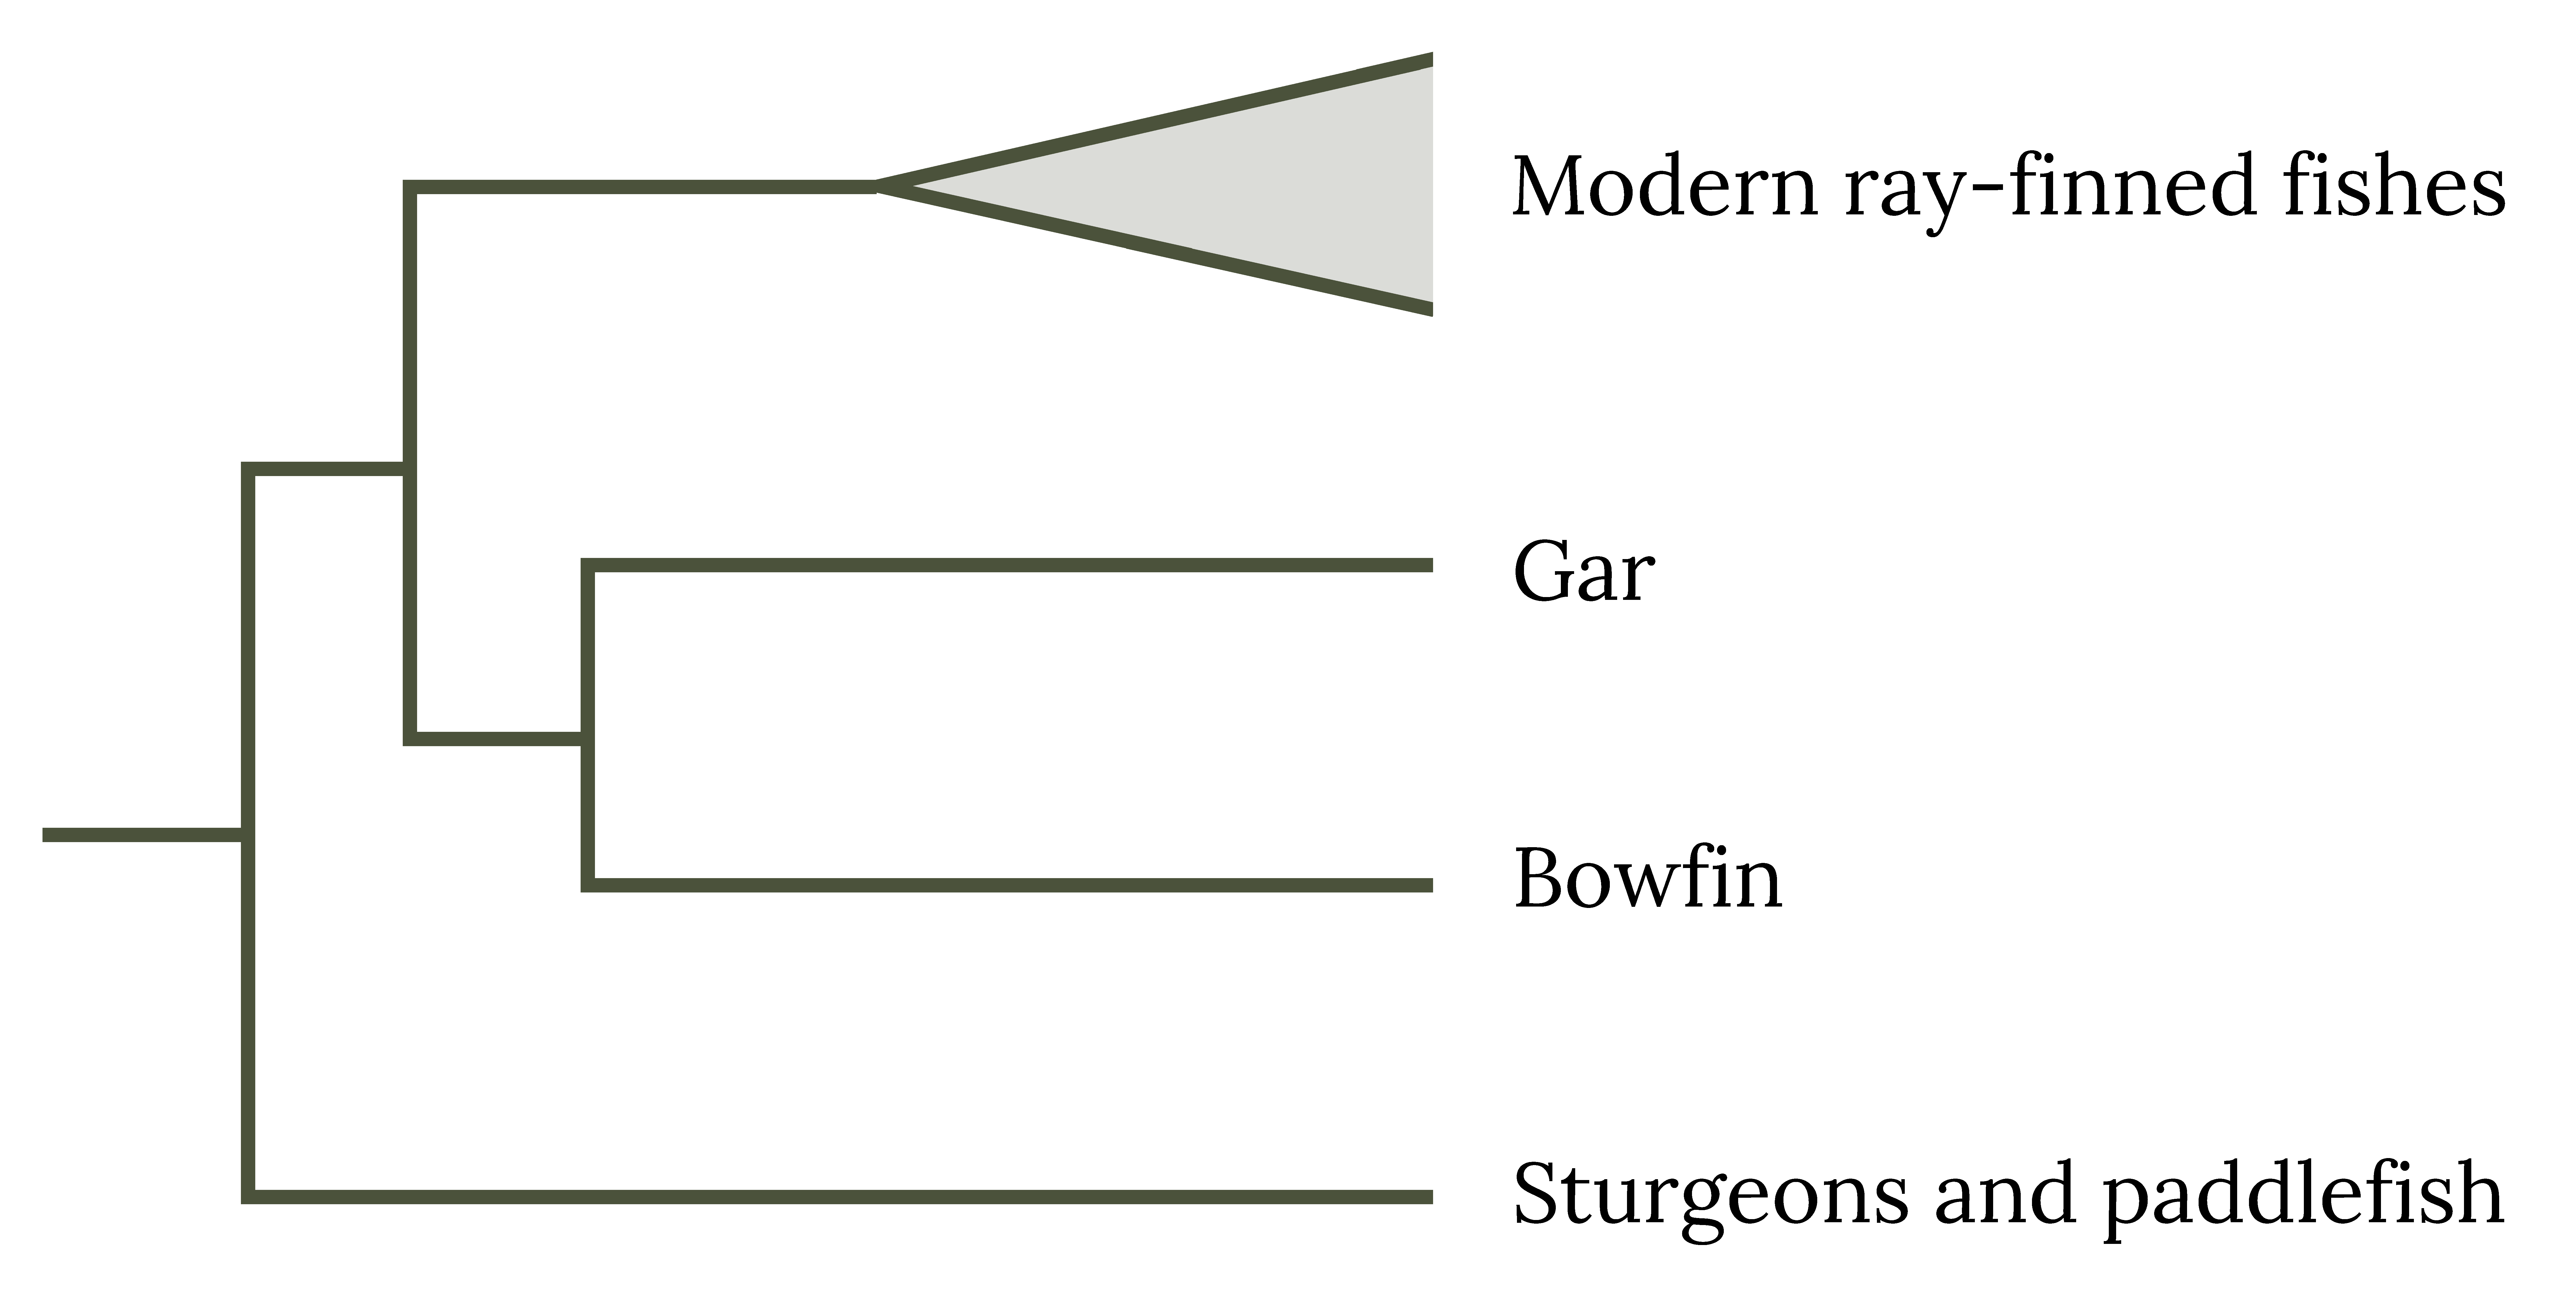 Sturgeons and paddlefish have a relationship to modern ray-finned fishes, gar, and bowfin in the phylogenetic tree chart.